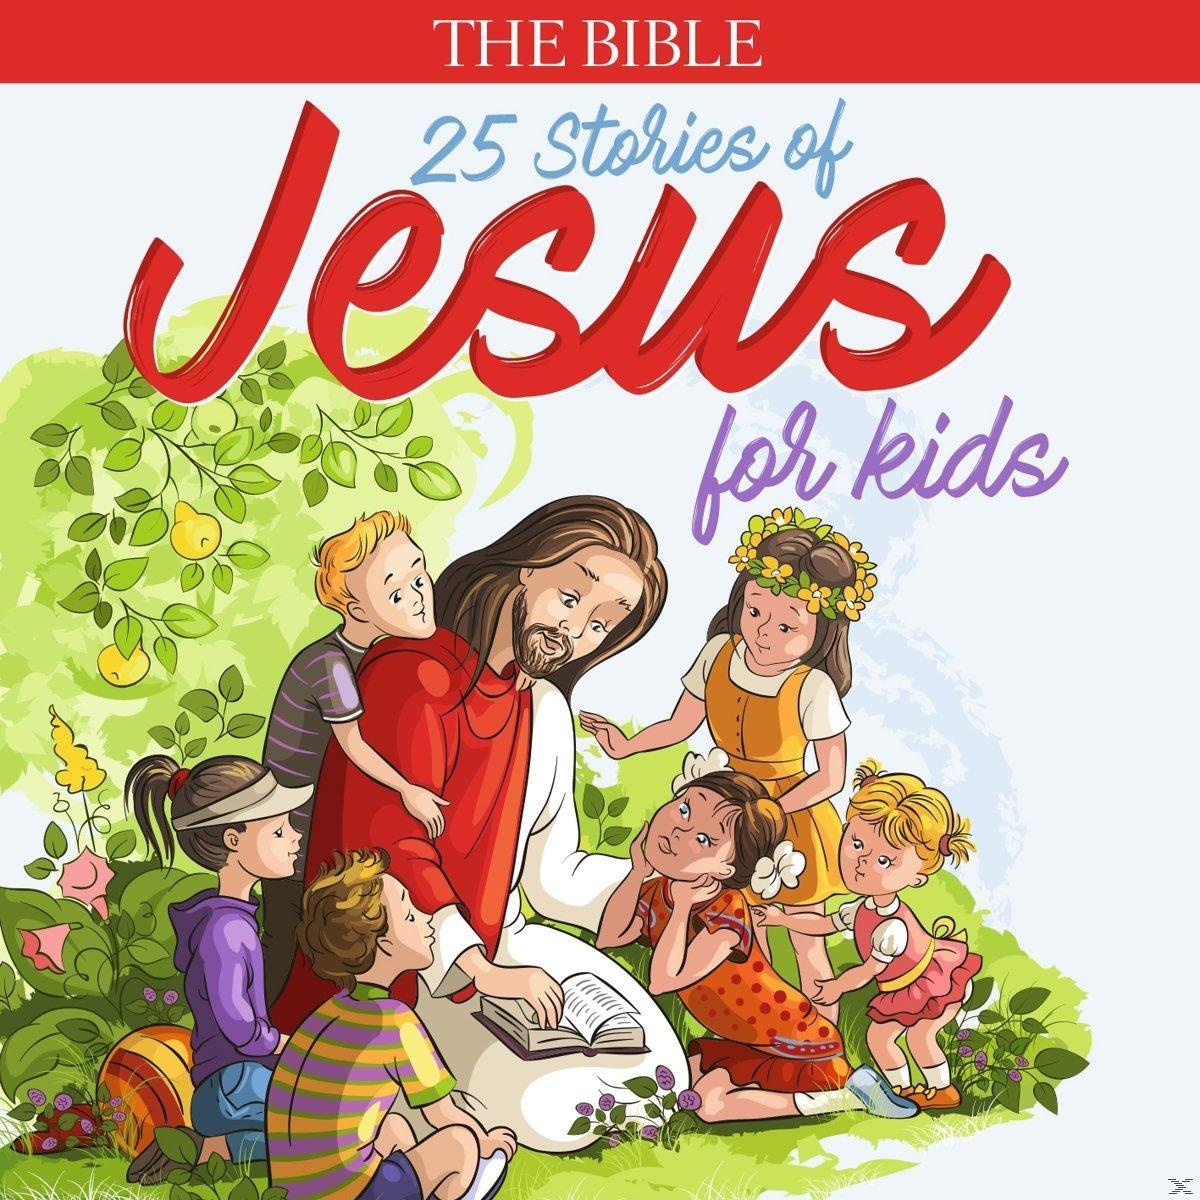 (CD) - - Kinds The Jesus Of Bible: Stories VARIOUS For